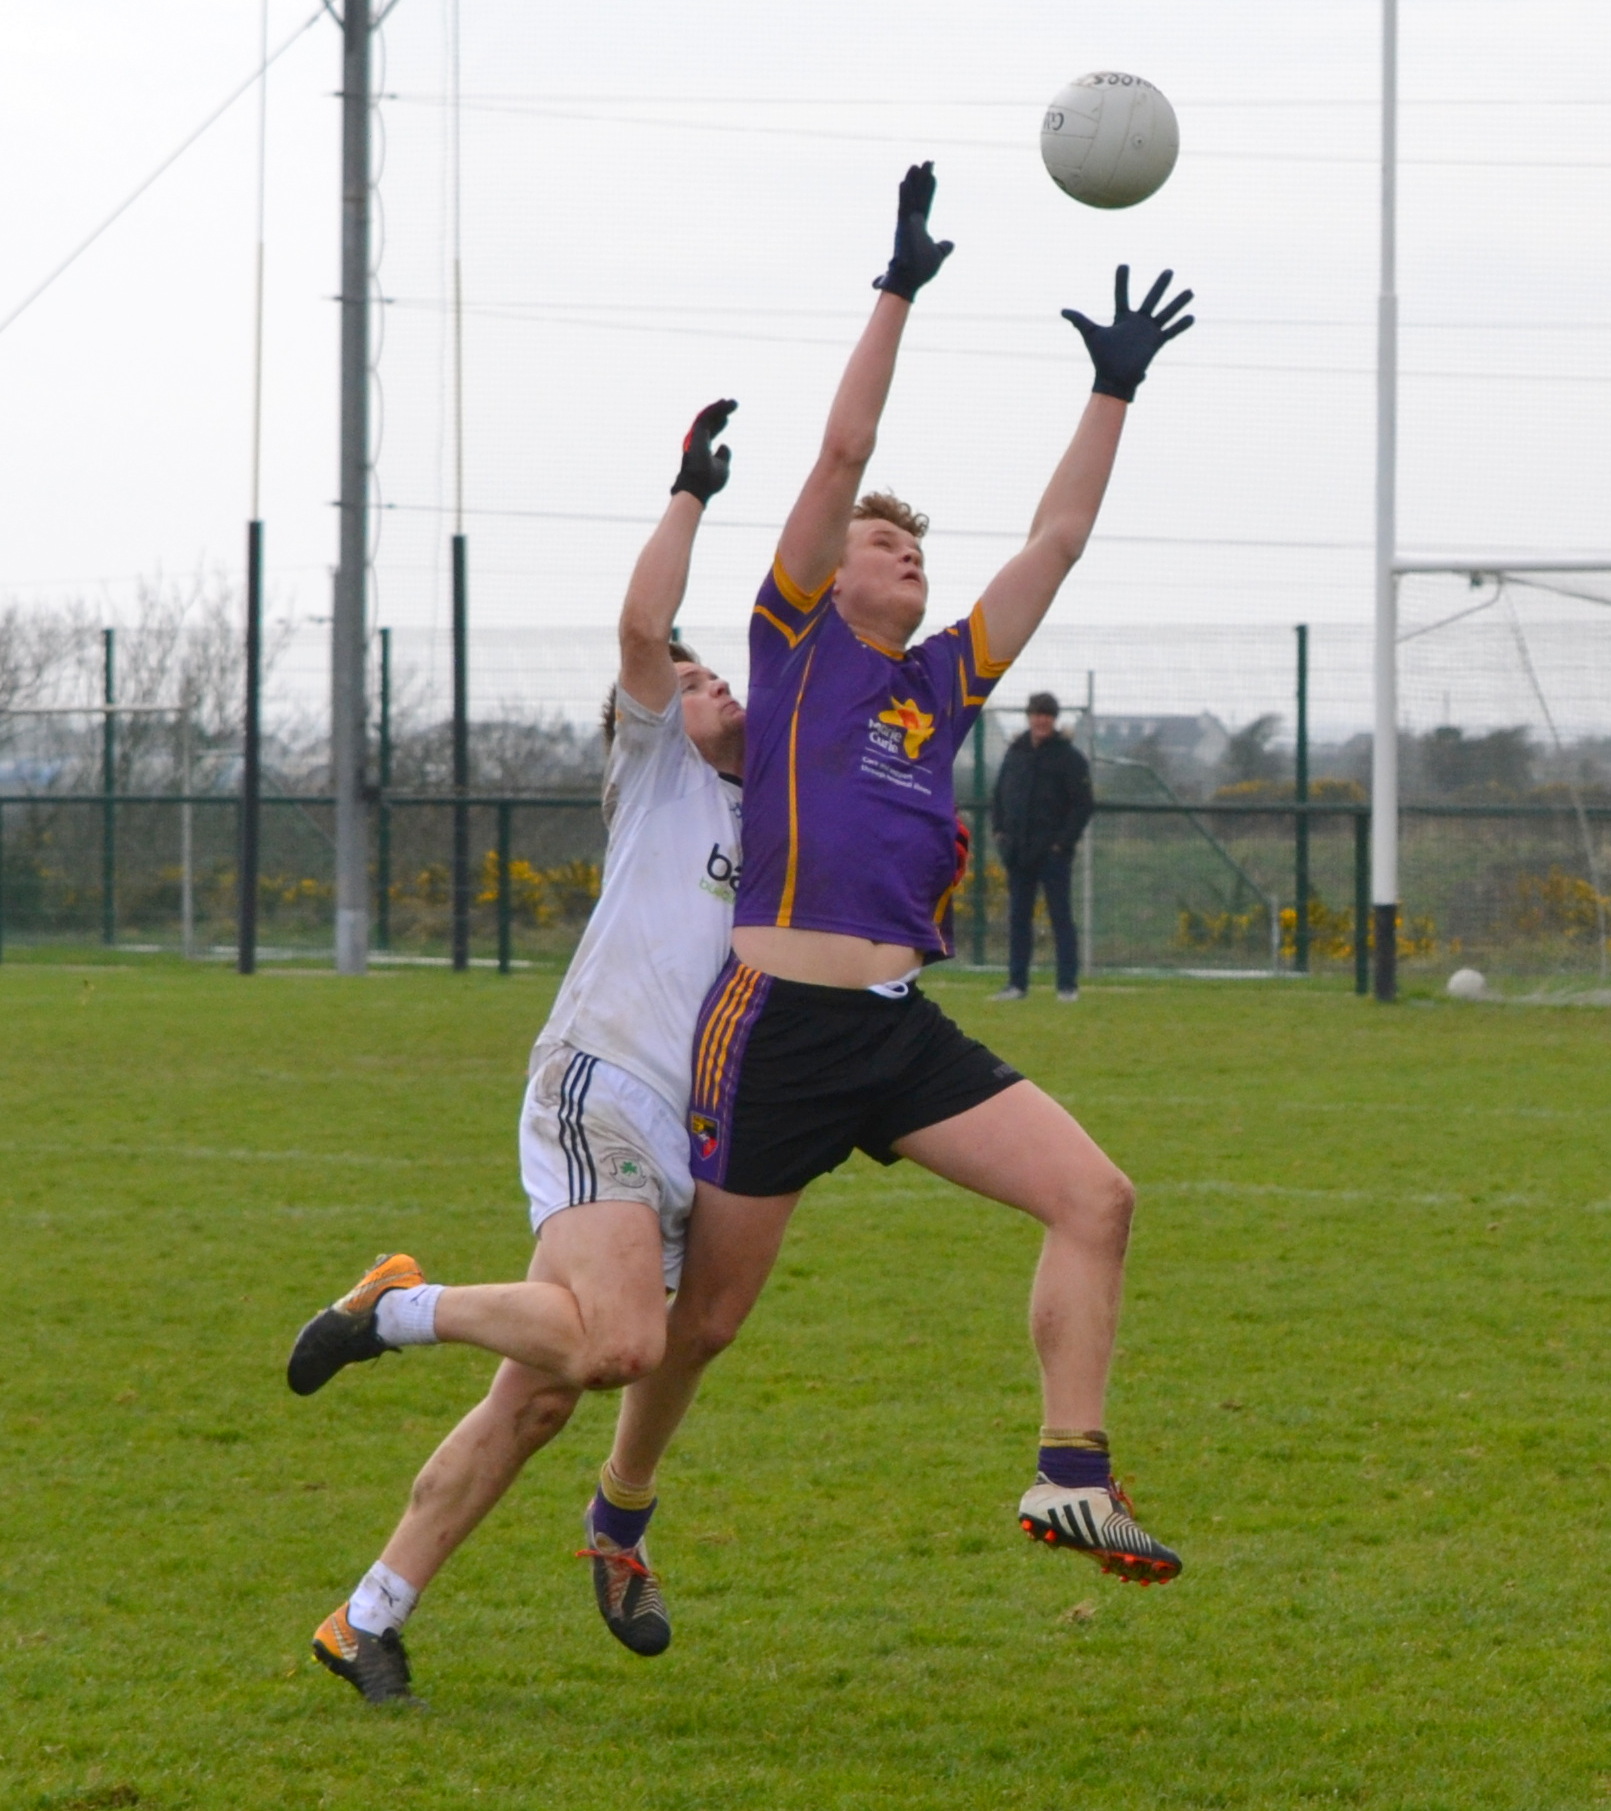 Carryduff claim first League points in Ballymartin